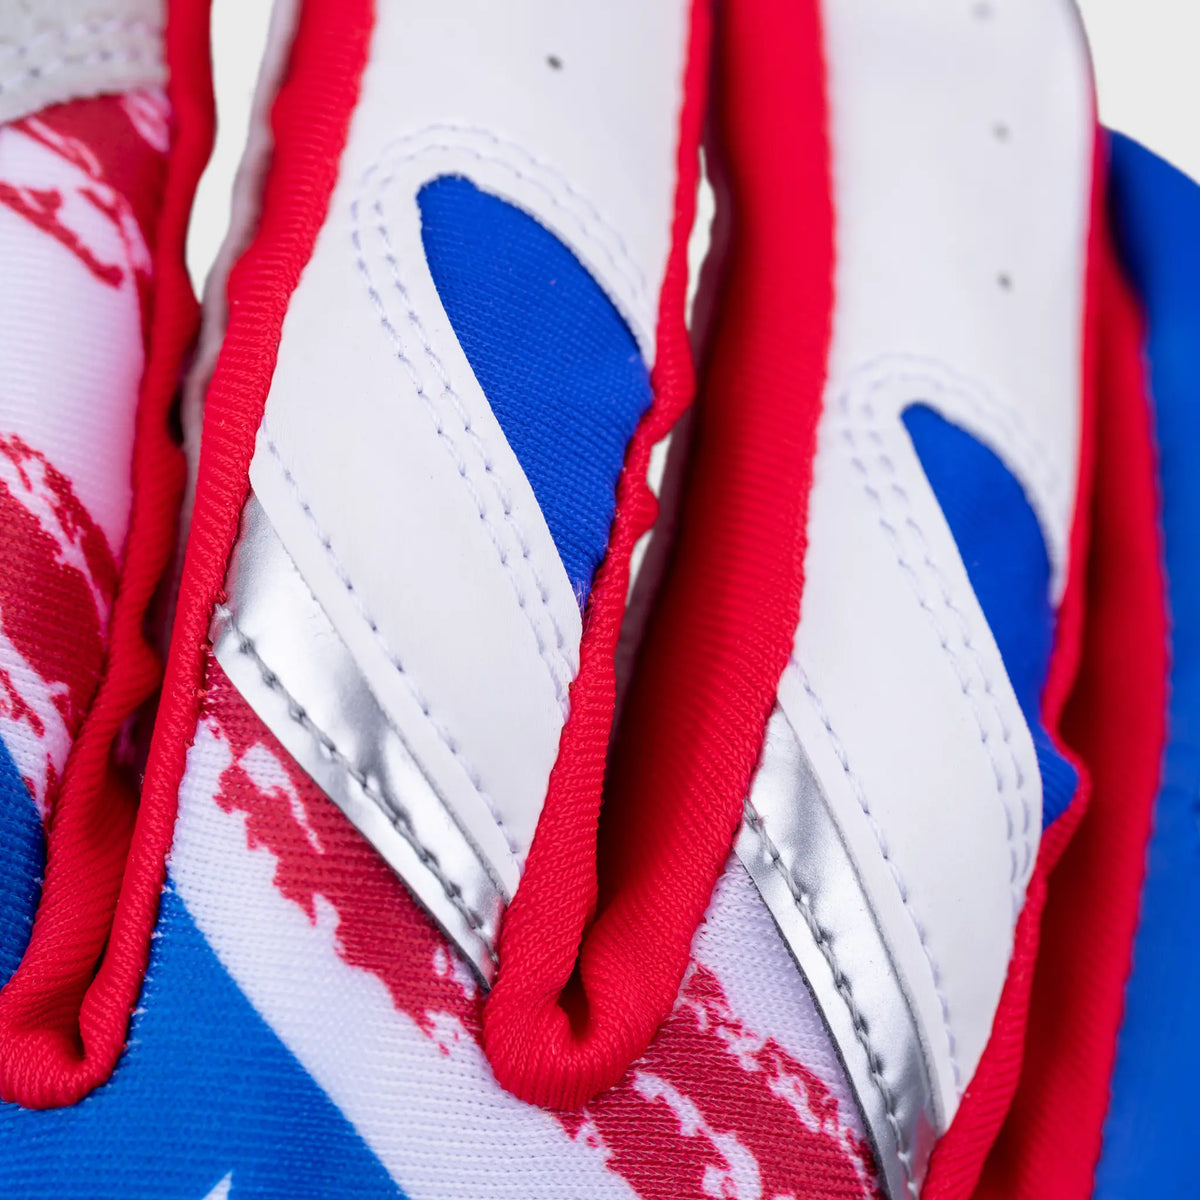 Intimate close-up of Tater Baseball batting gloves displaying the intricate finger design with vibrant red laces against a backdrop of the Puerto Rican flag&#39;s colors and pattern